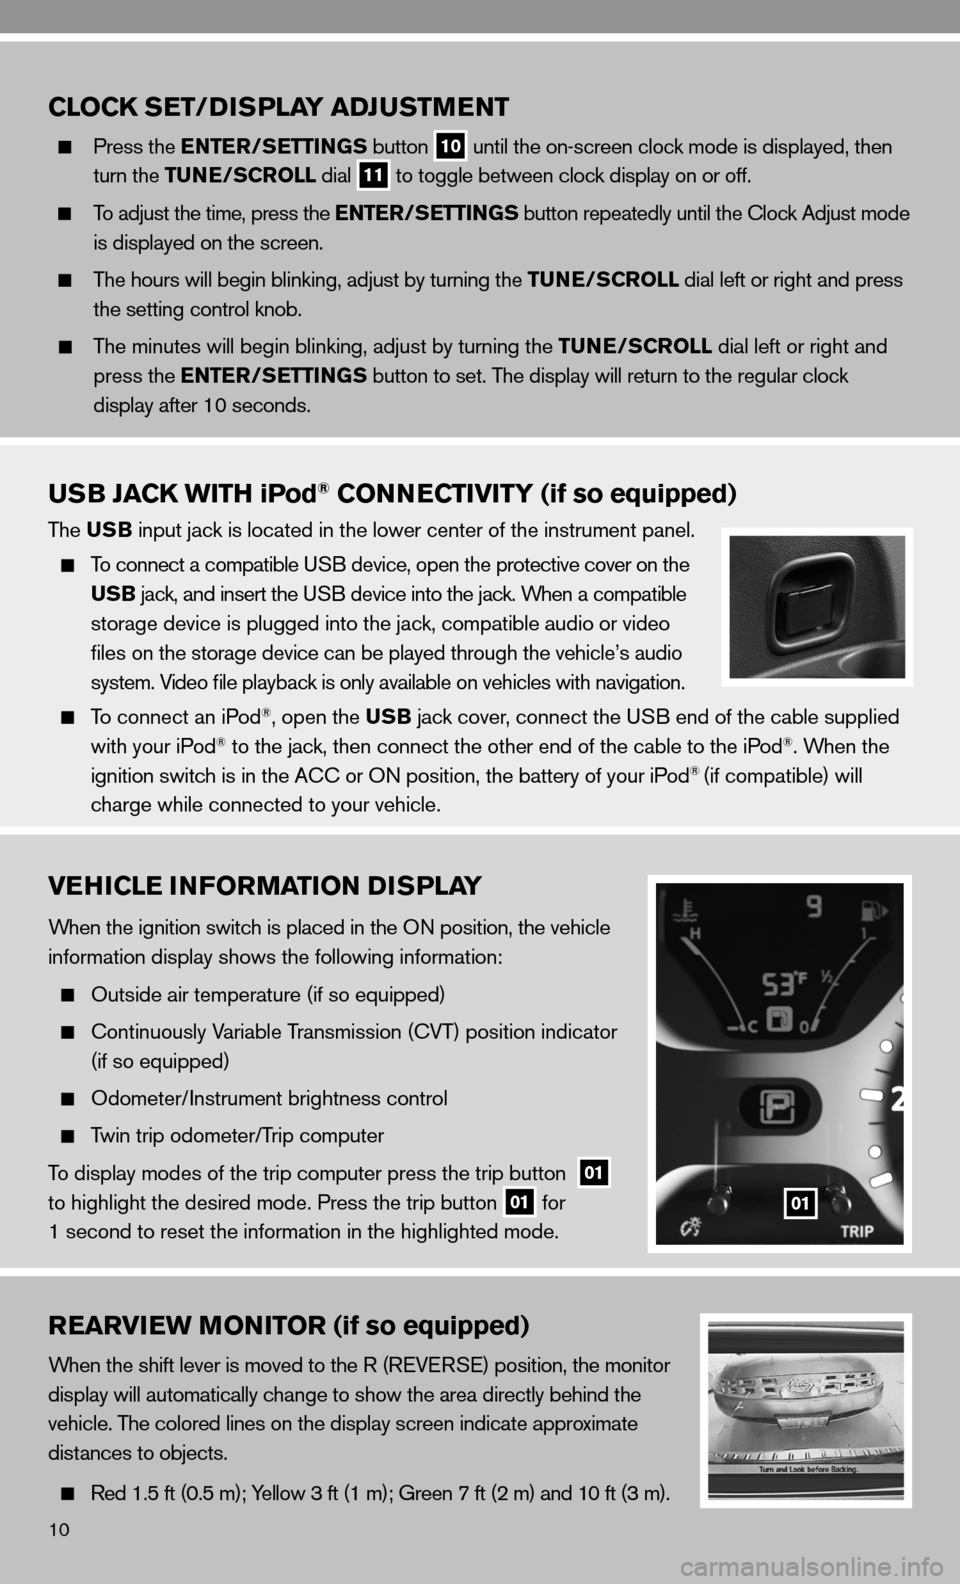 NISSAN CUBE 2010 3.G Quick Reference Guide 10
VEHICLE INFORMATION DISPLAY
When the ignition switch is placed in the On position, the vehicle 
information display shows the following information:
 
  Outside air temperature (if so equipped)
 
 